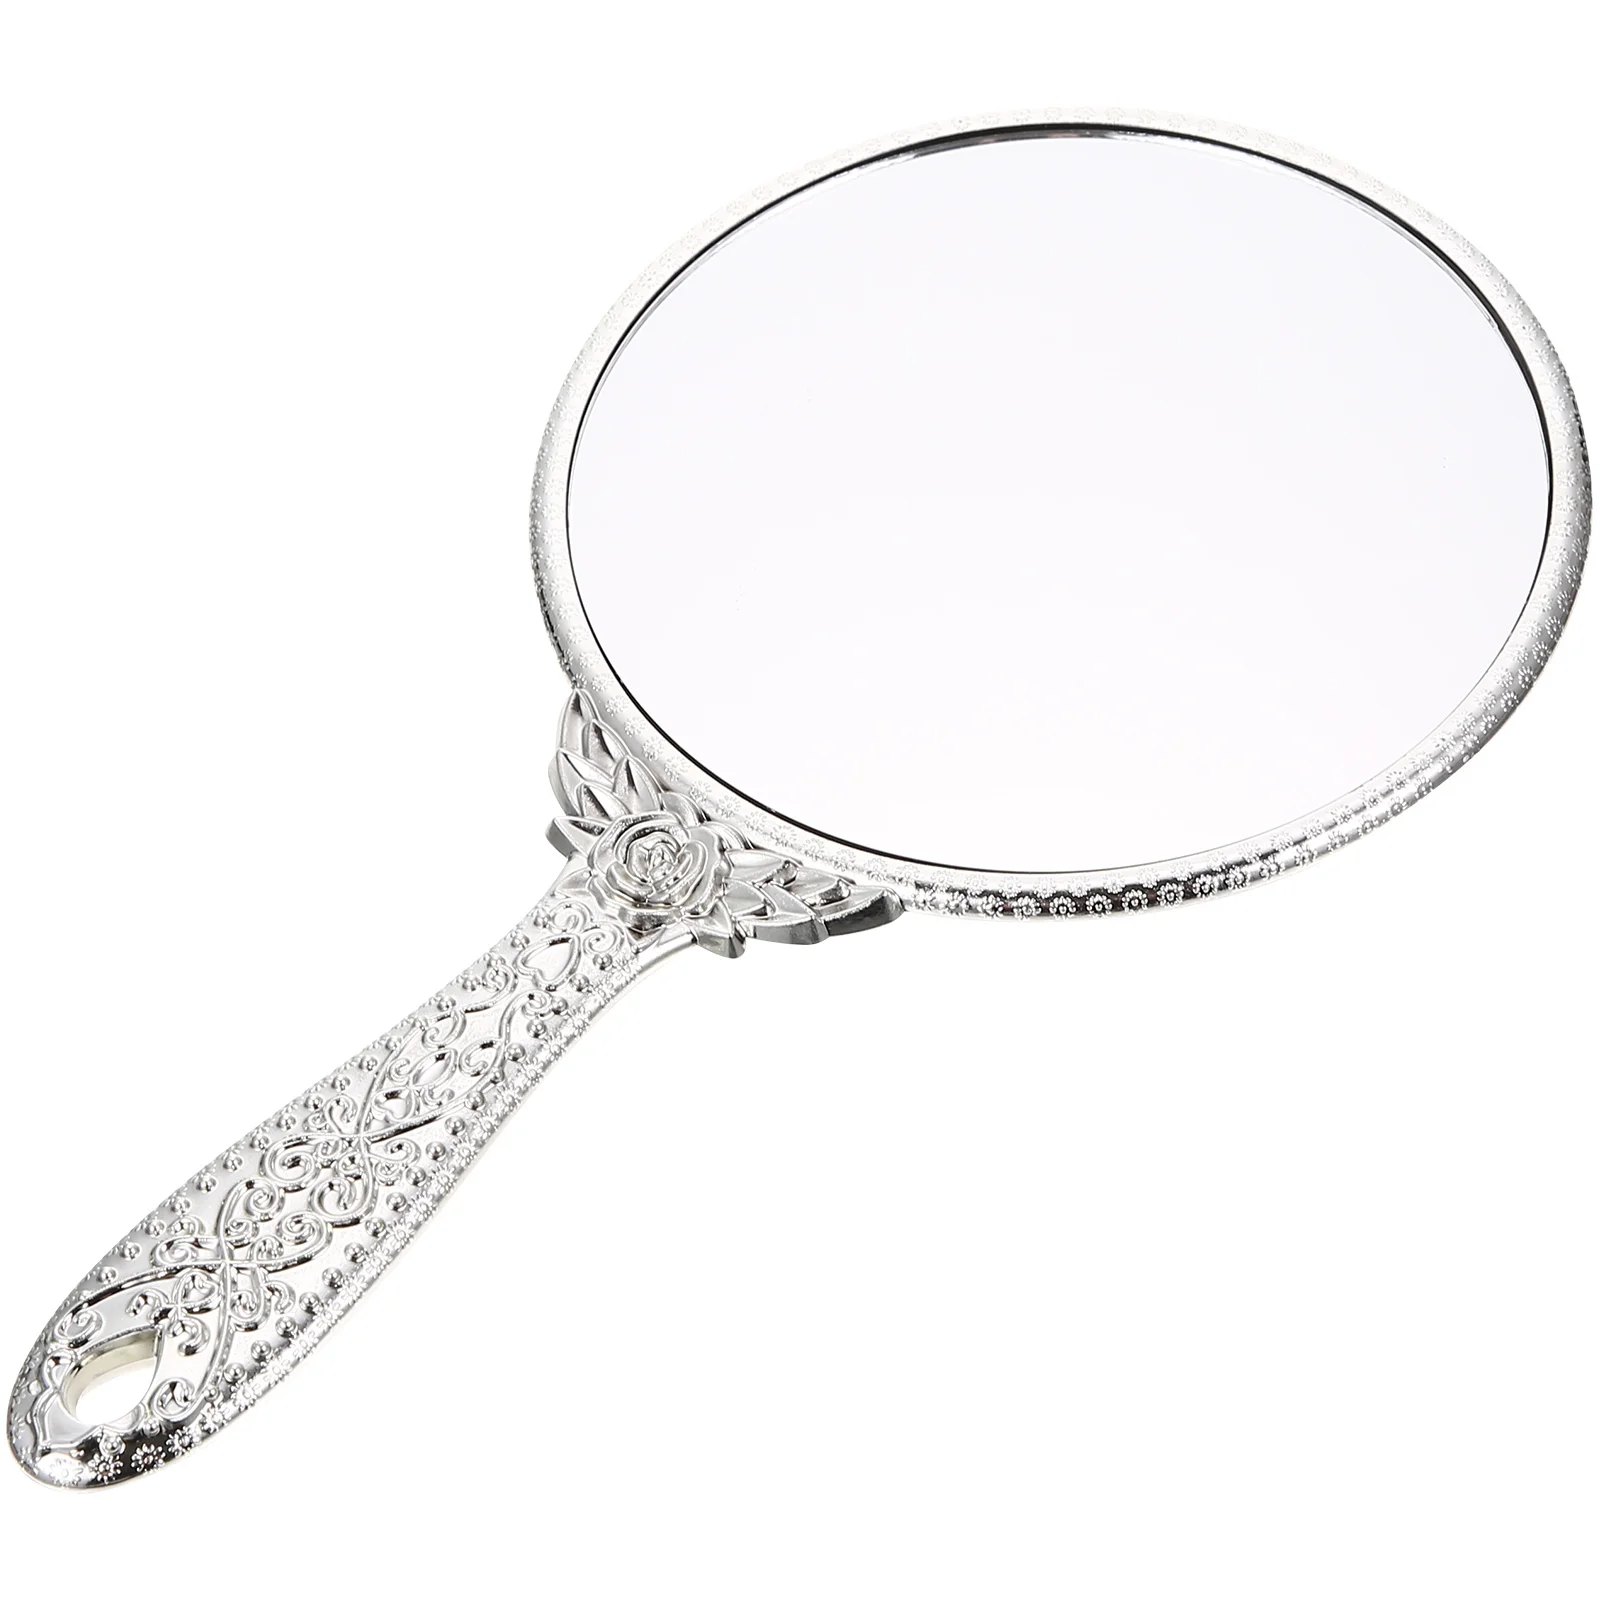 

Vintage Handheld Mirror Embossed Flower: Hand Held Decorative Mirrors Mirror with Handle Travel Portable Silver Makeup